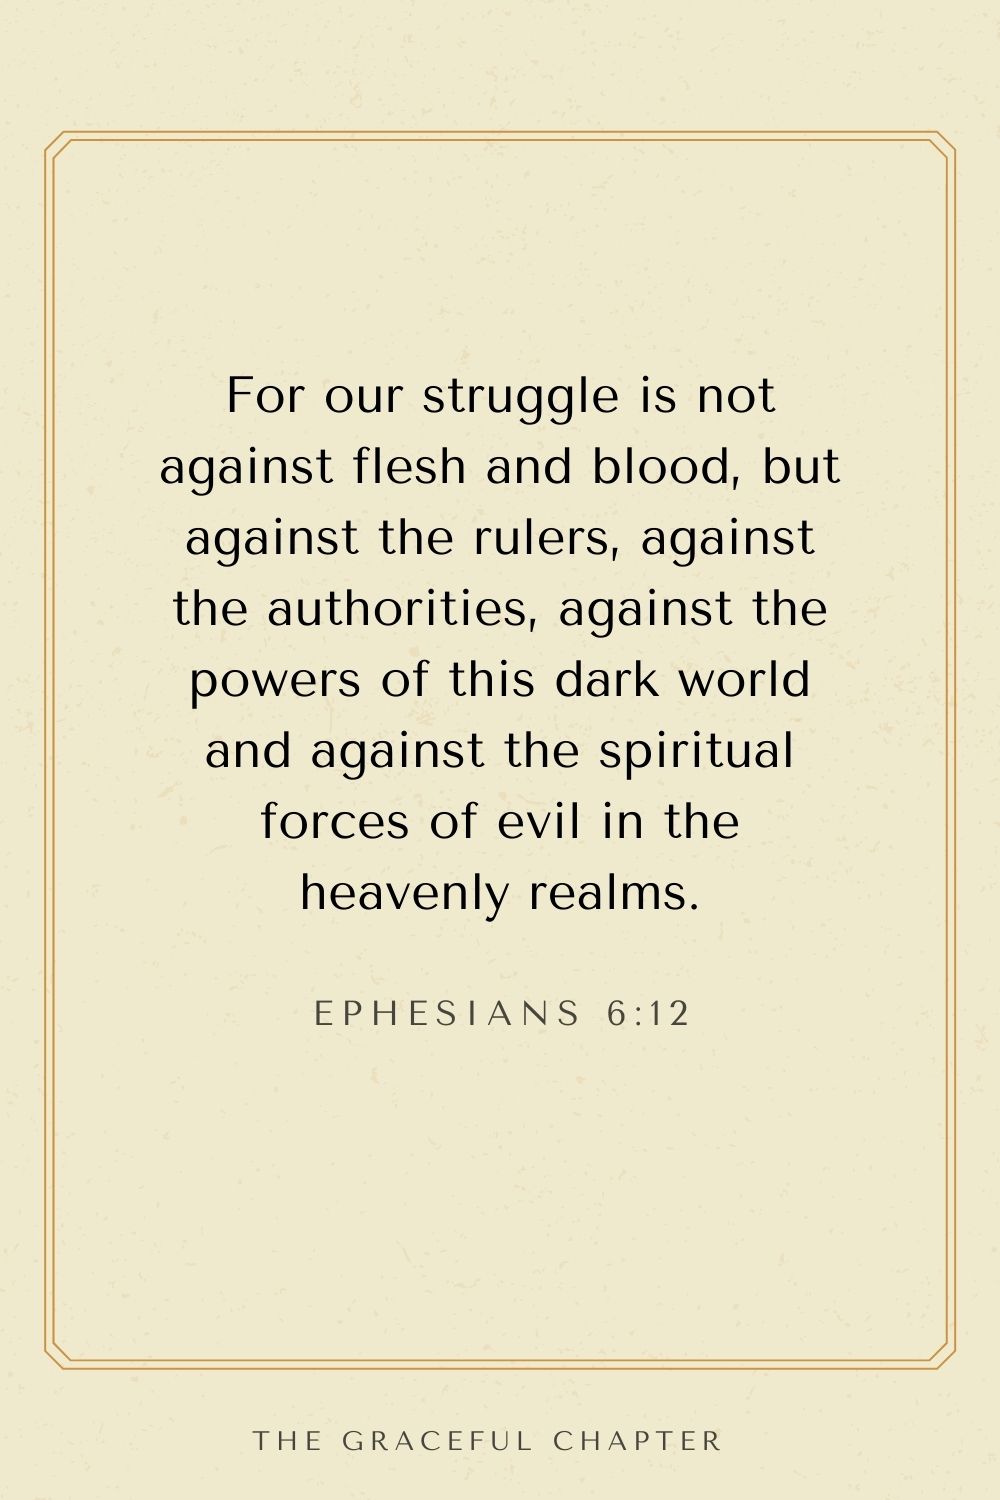 breakthrough bible verses- For our struggle is not against flesh and blood, but against the rulers, against the authorities, against the powers of this dark world and against the spiritual forces of evil in the heavenly realms. Ephesians 6:12